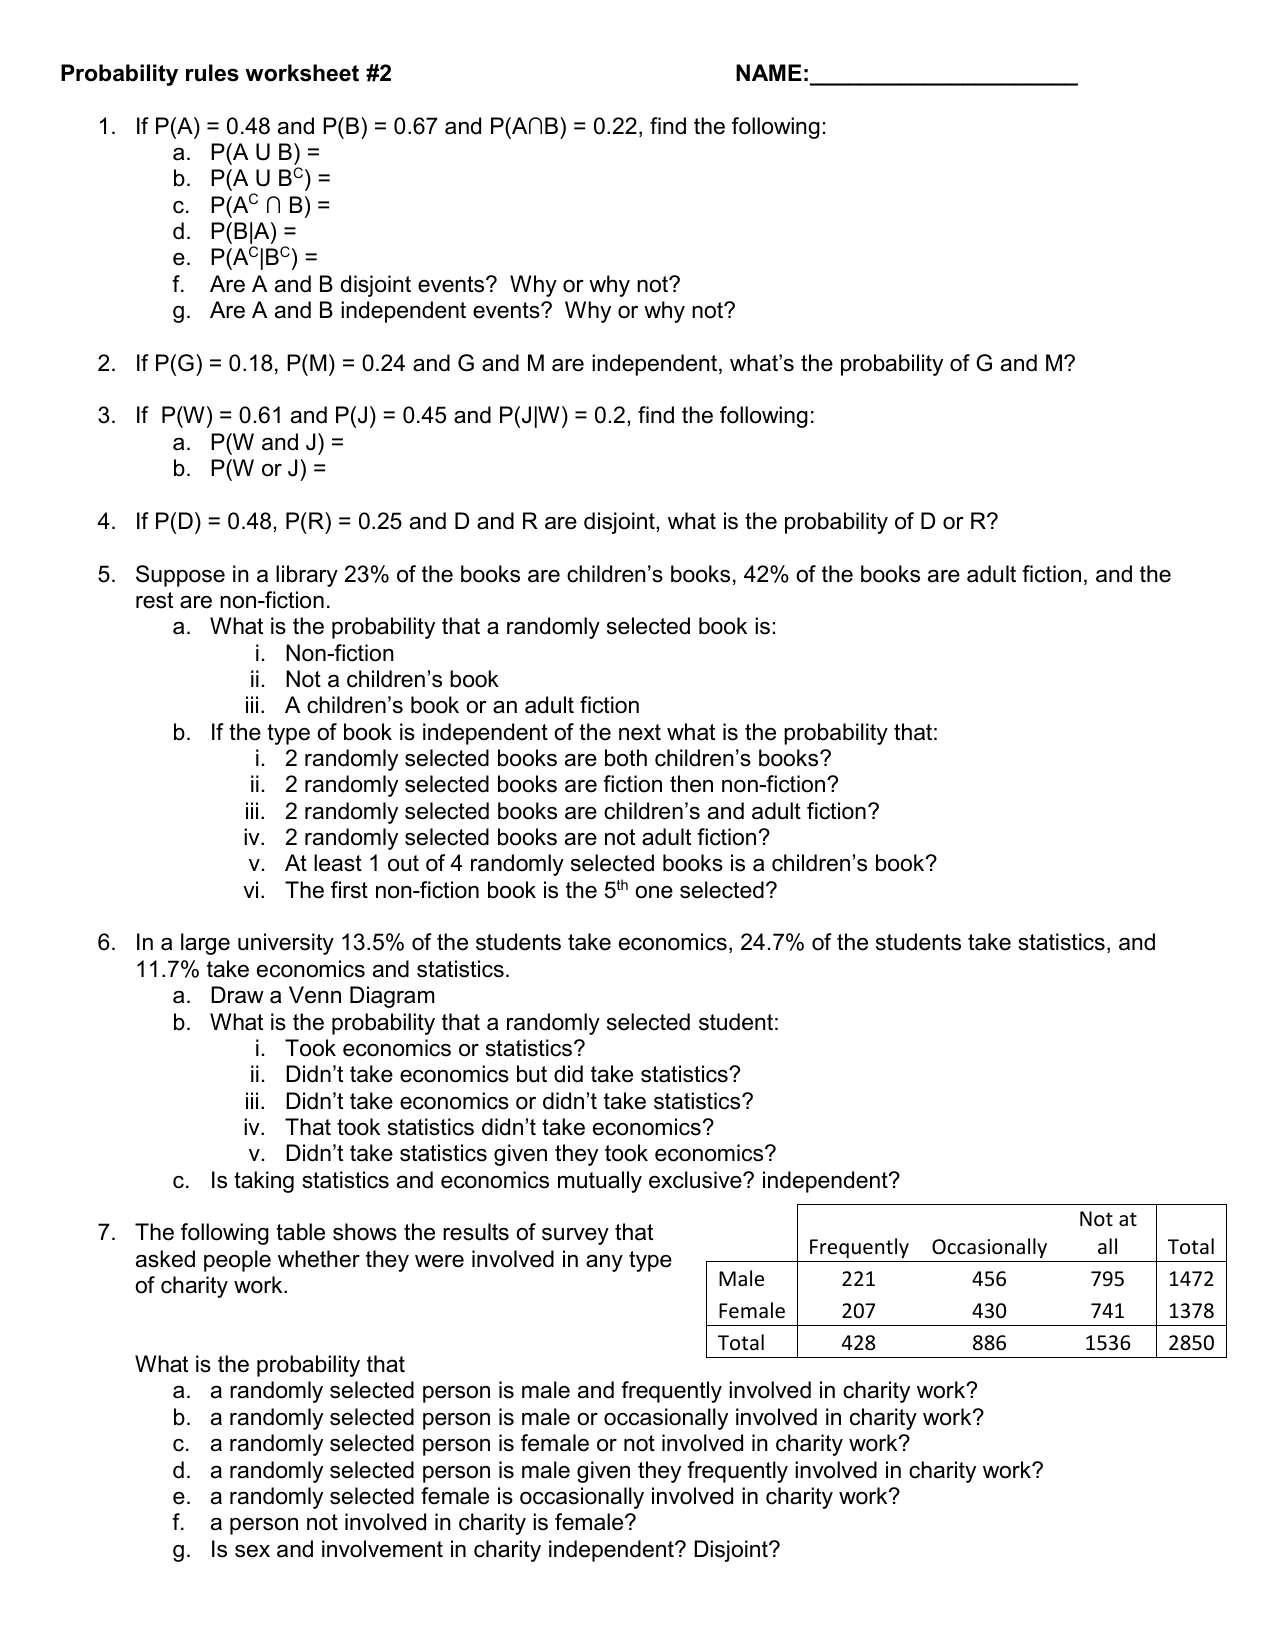 Probability Rules Worksheet 2 With Answers 1